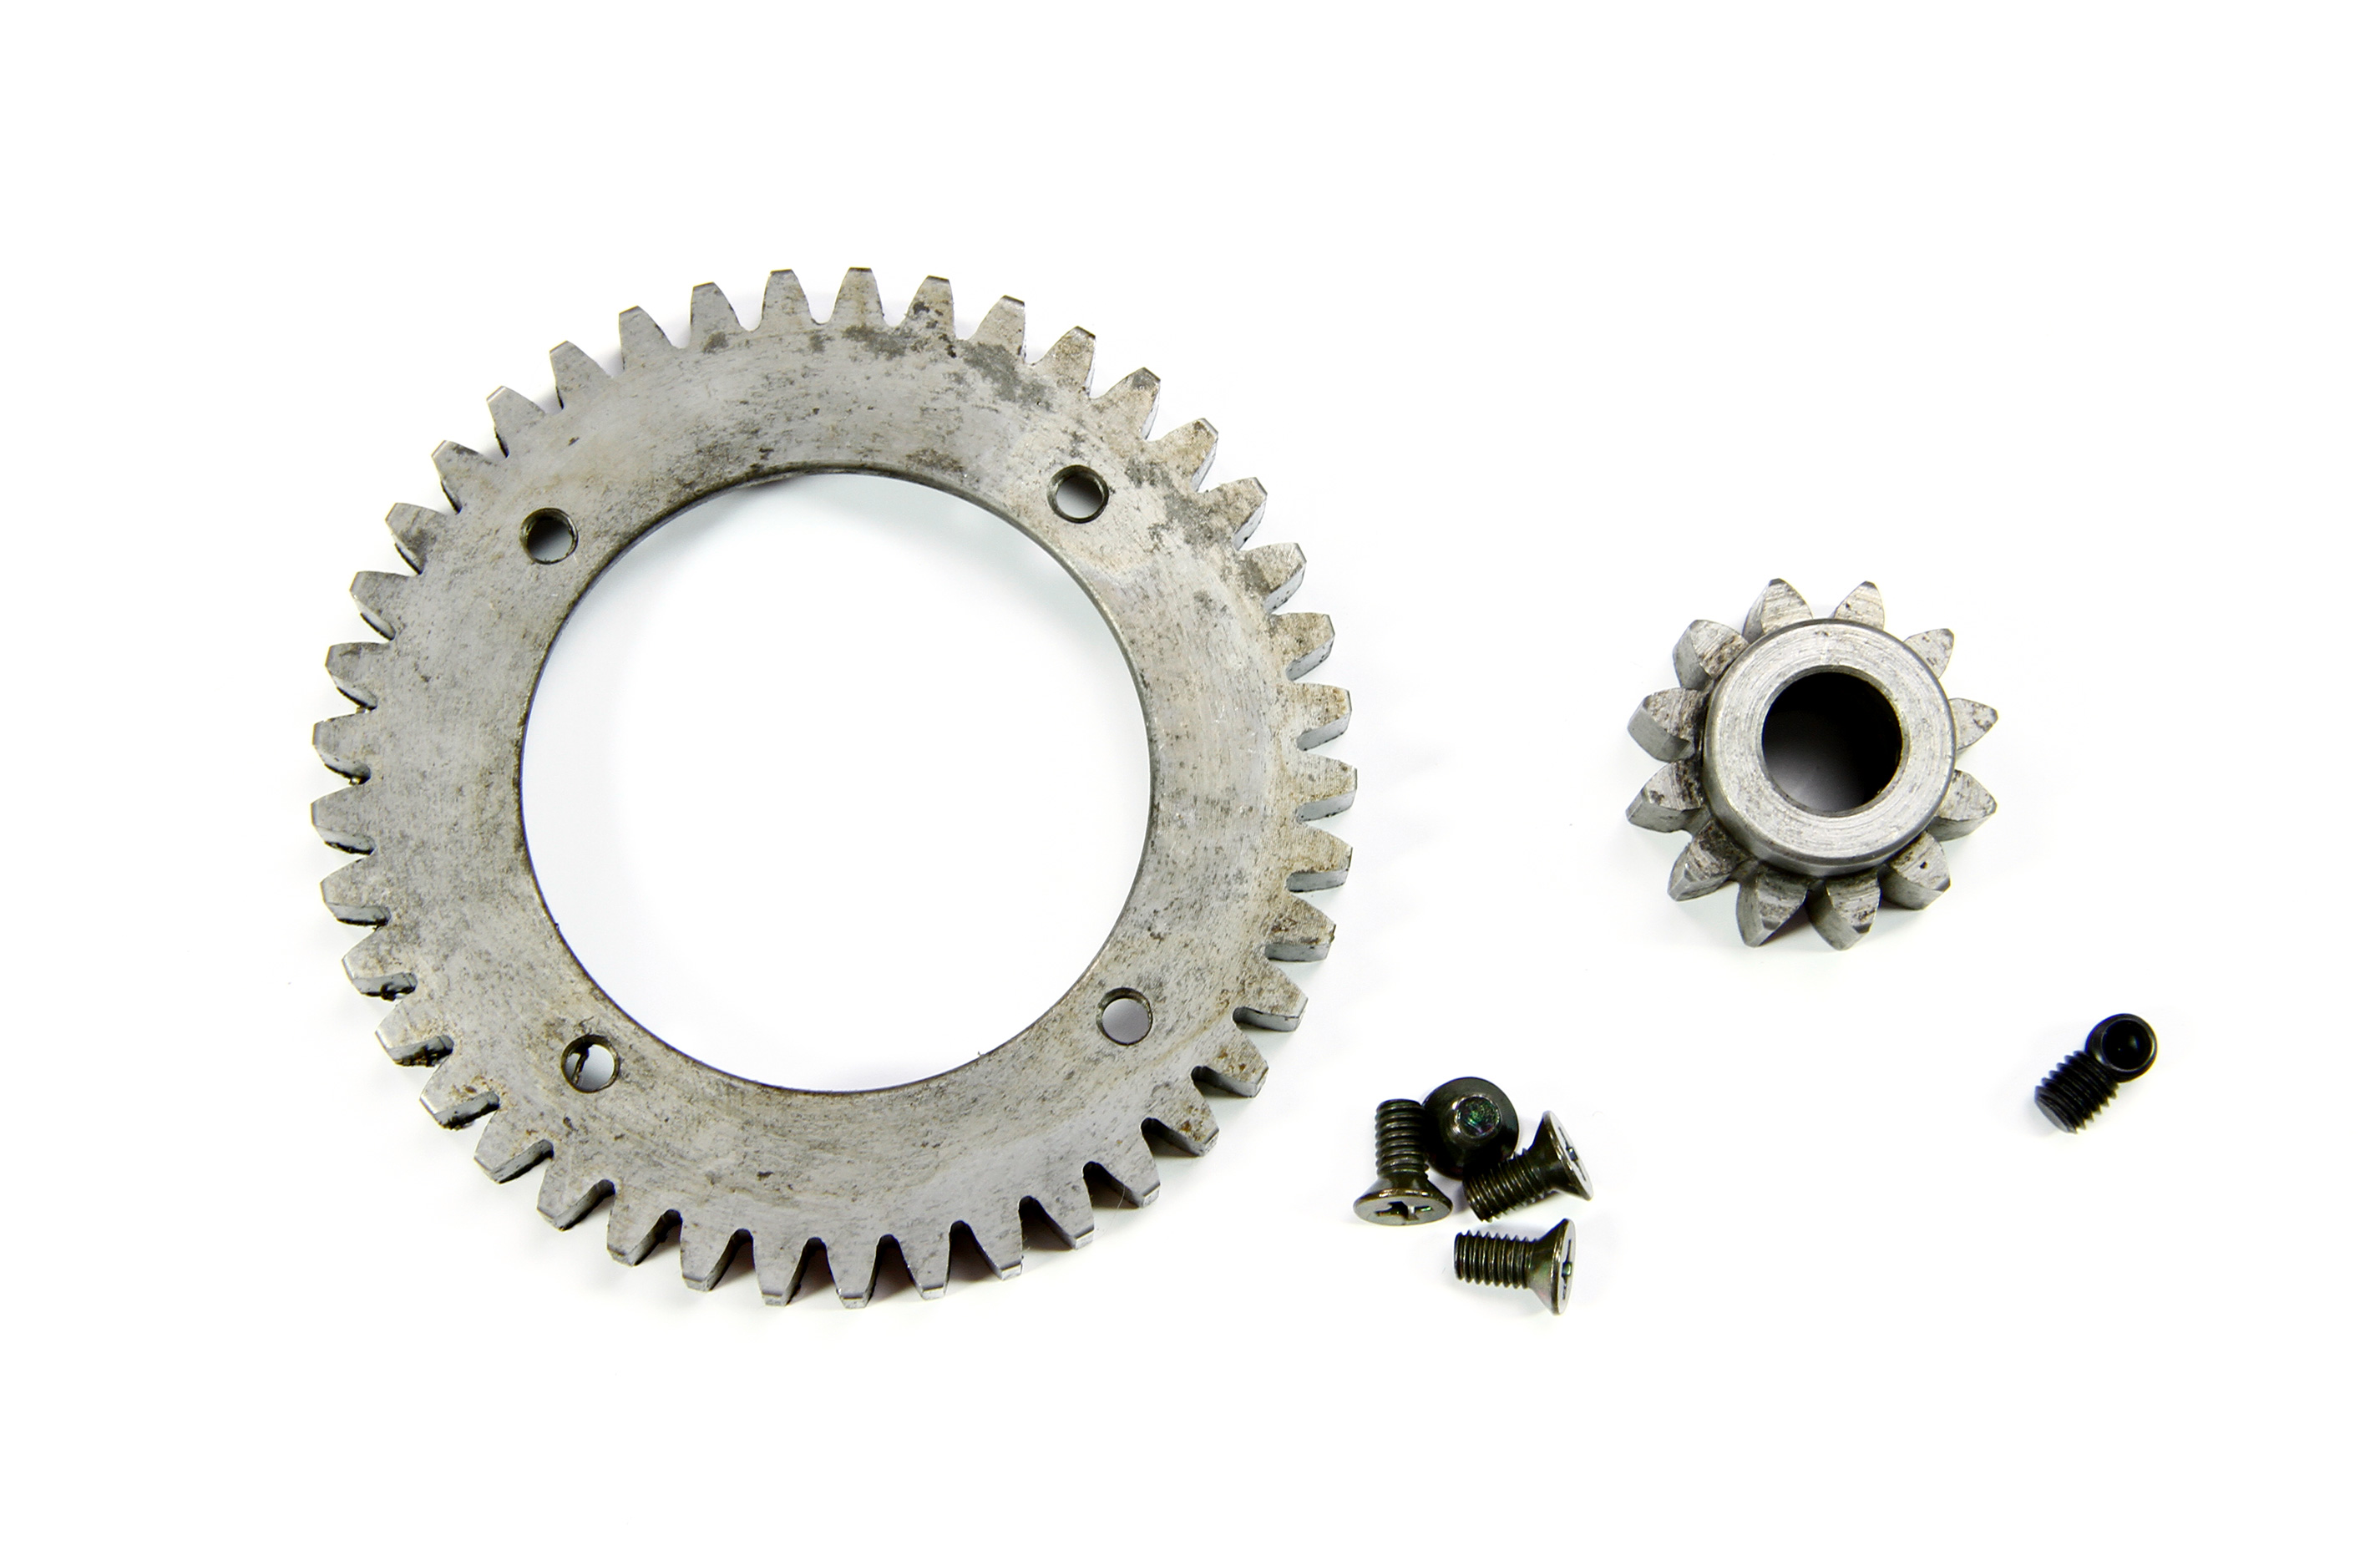 y0693 Extreme-Duty spur gear for FG, Smartech / Carson Offroad 2WD